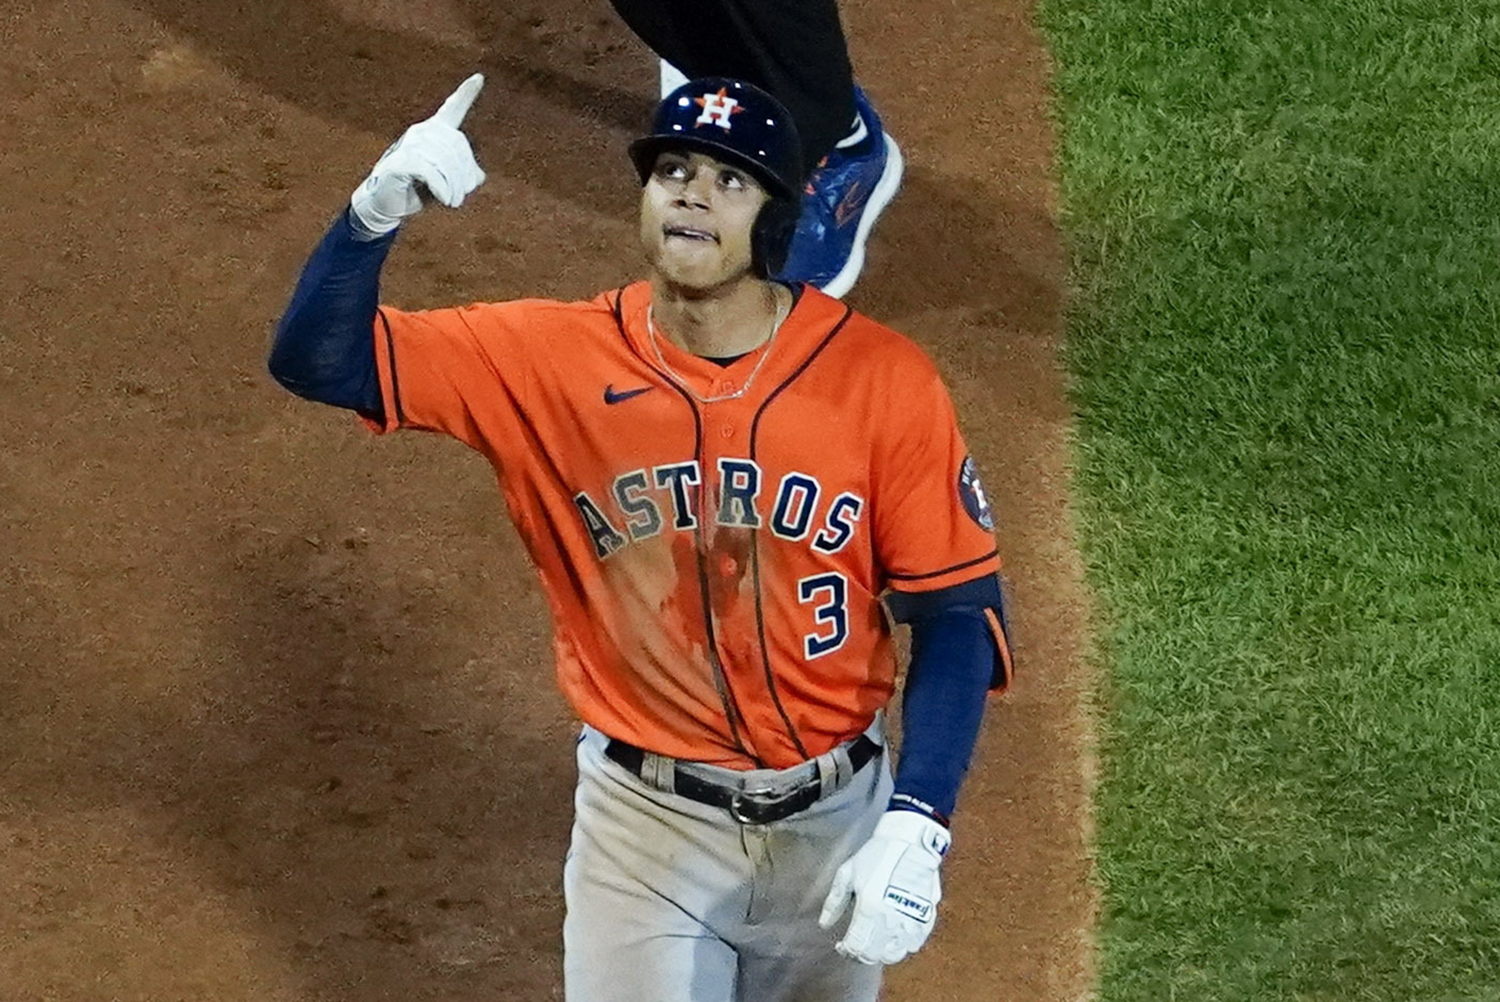 World Series: Astros head home to Houston leading Phils 3-2